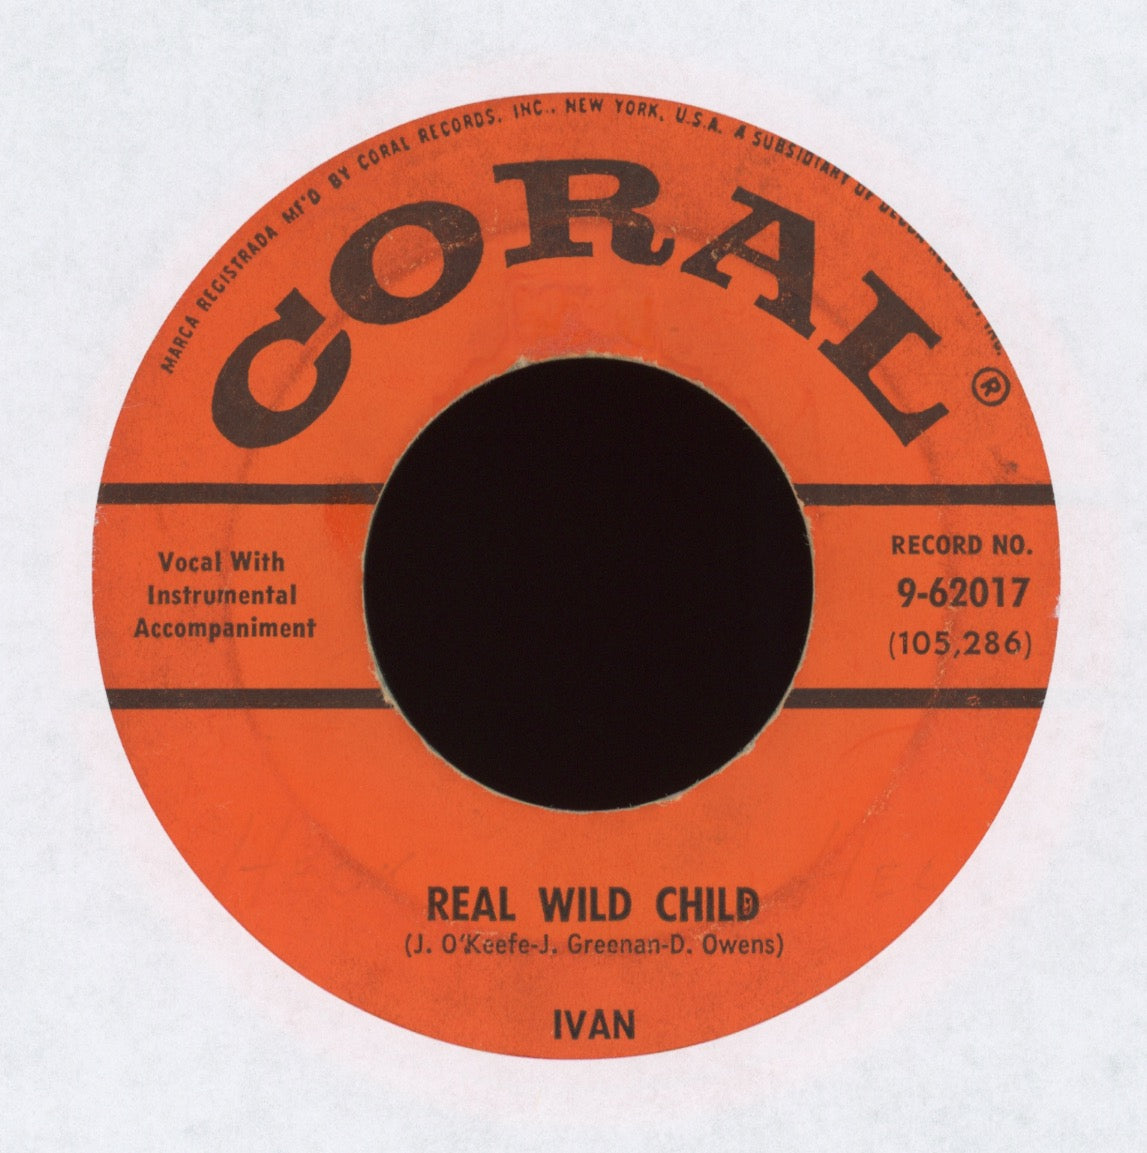 Ivan - Real Wild Child on Coral